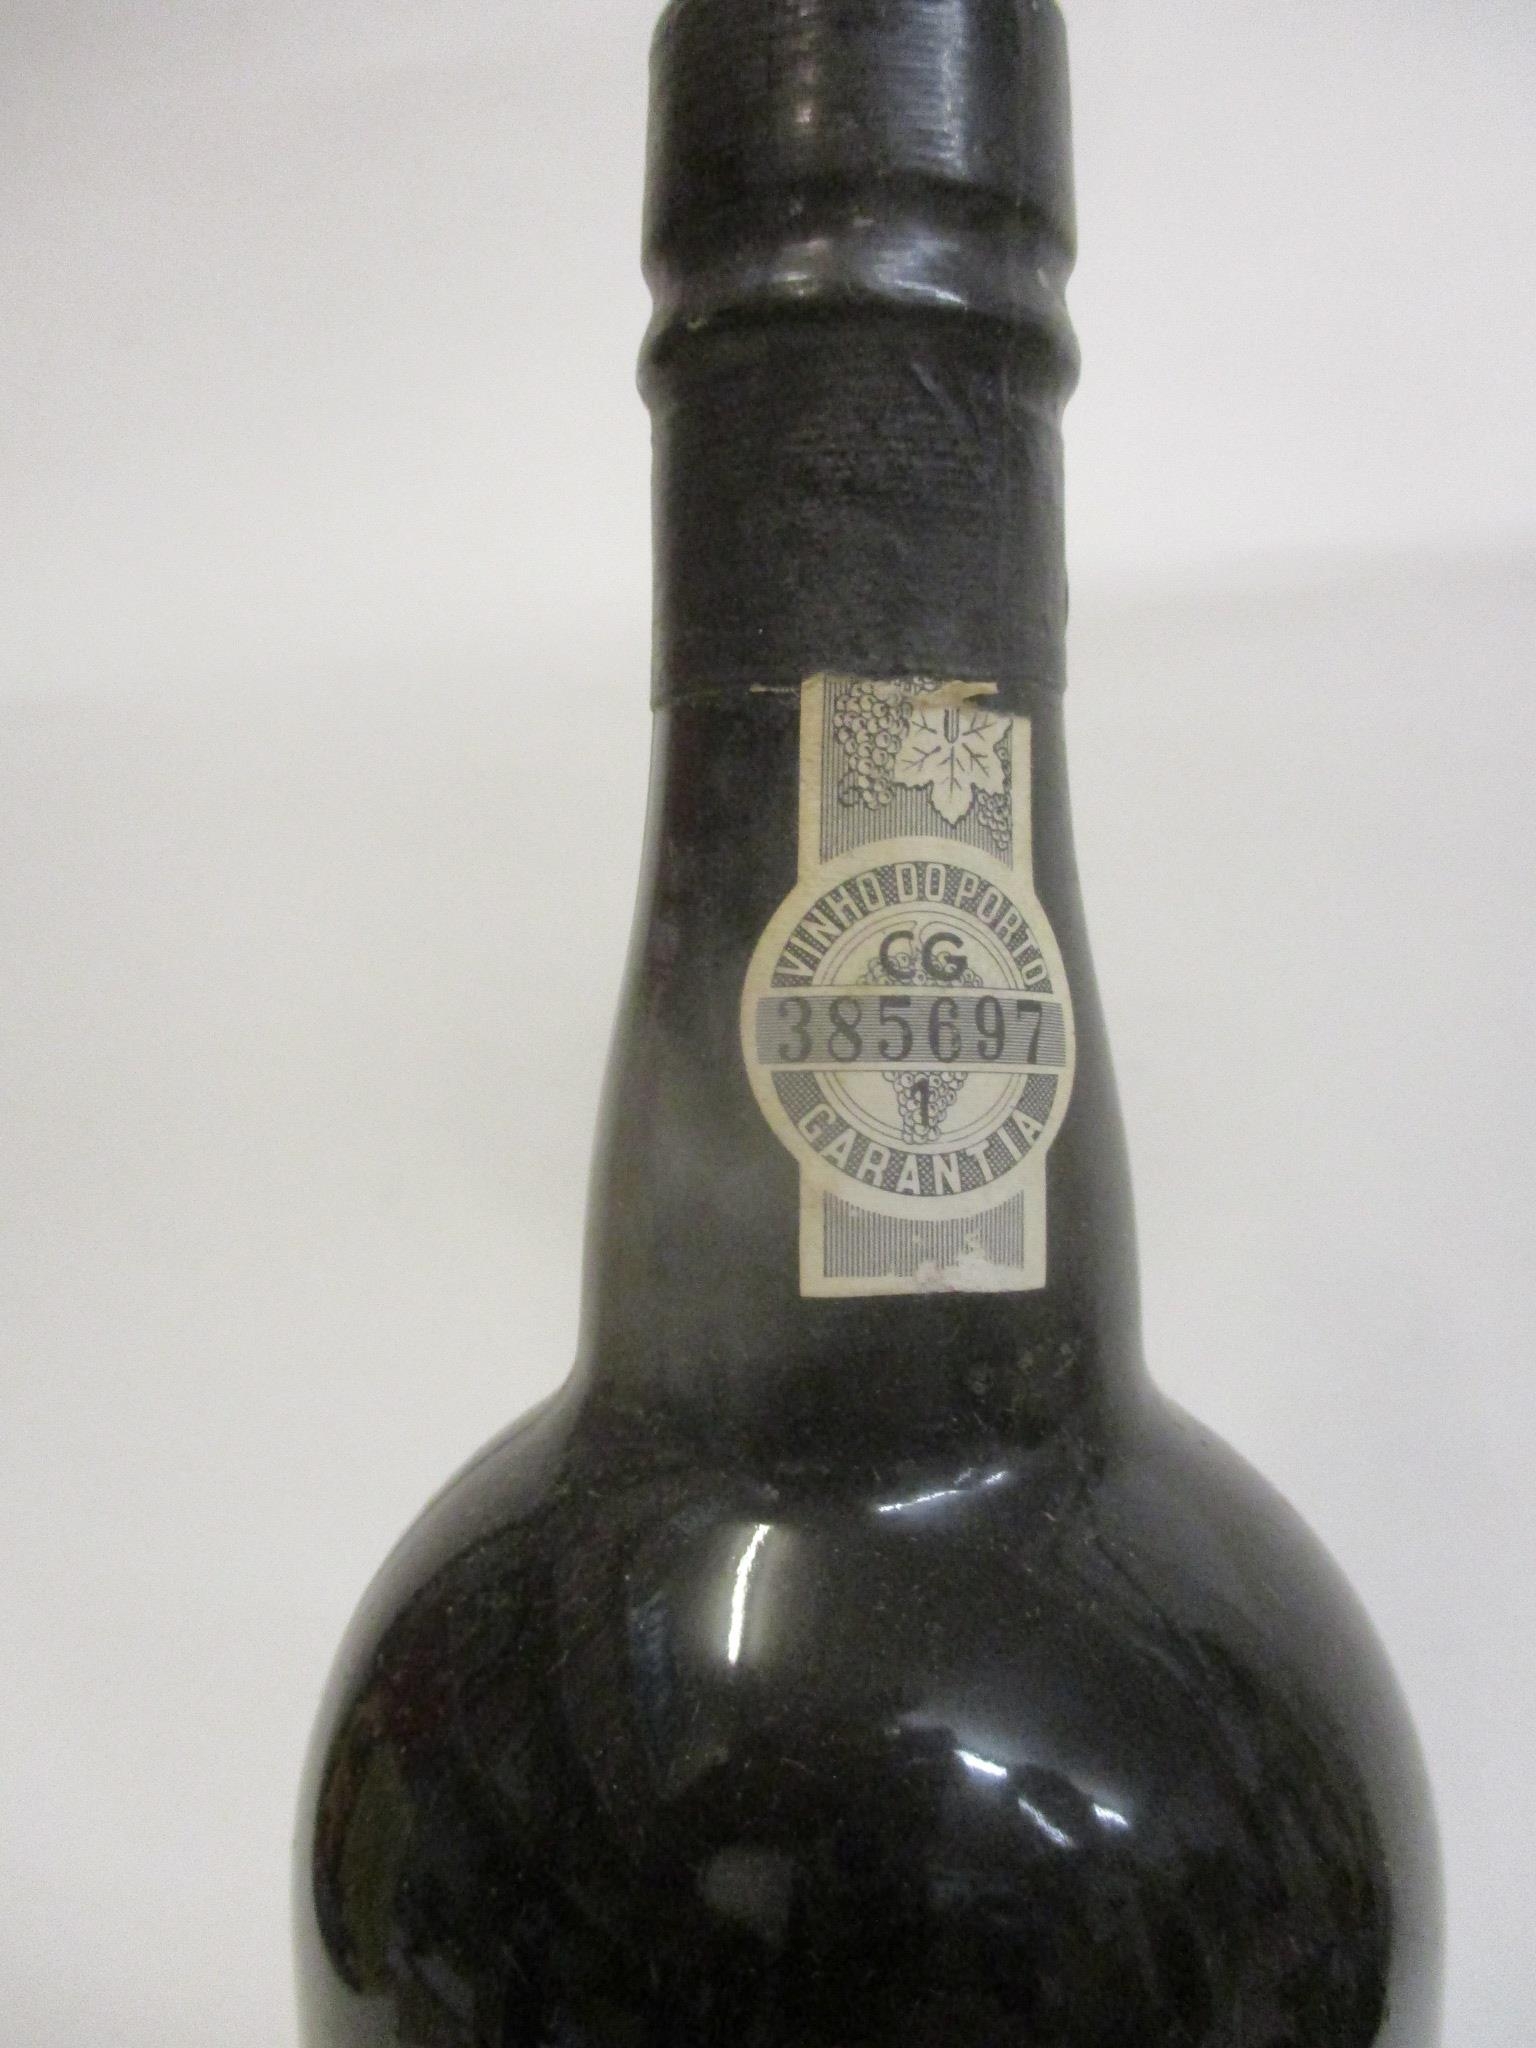 One bottle of Churchill Port Agua Alta, 1987 Vintage, 75cl - Image 3 of 3